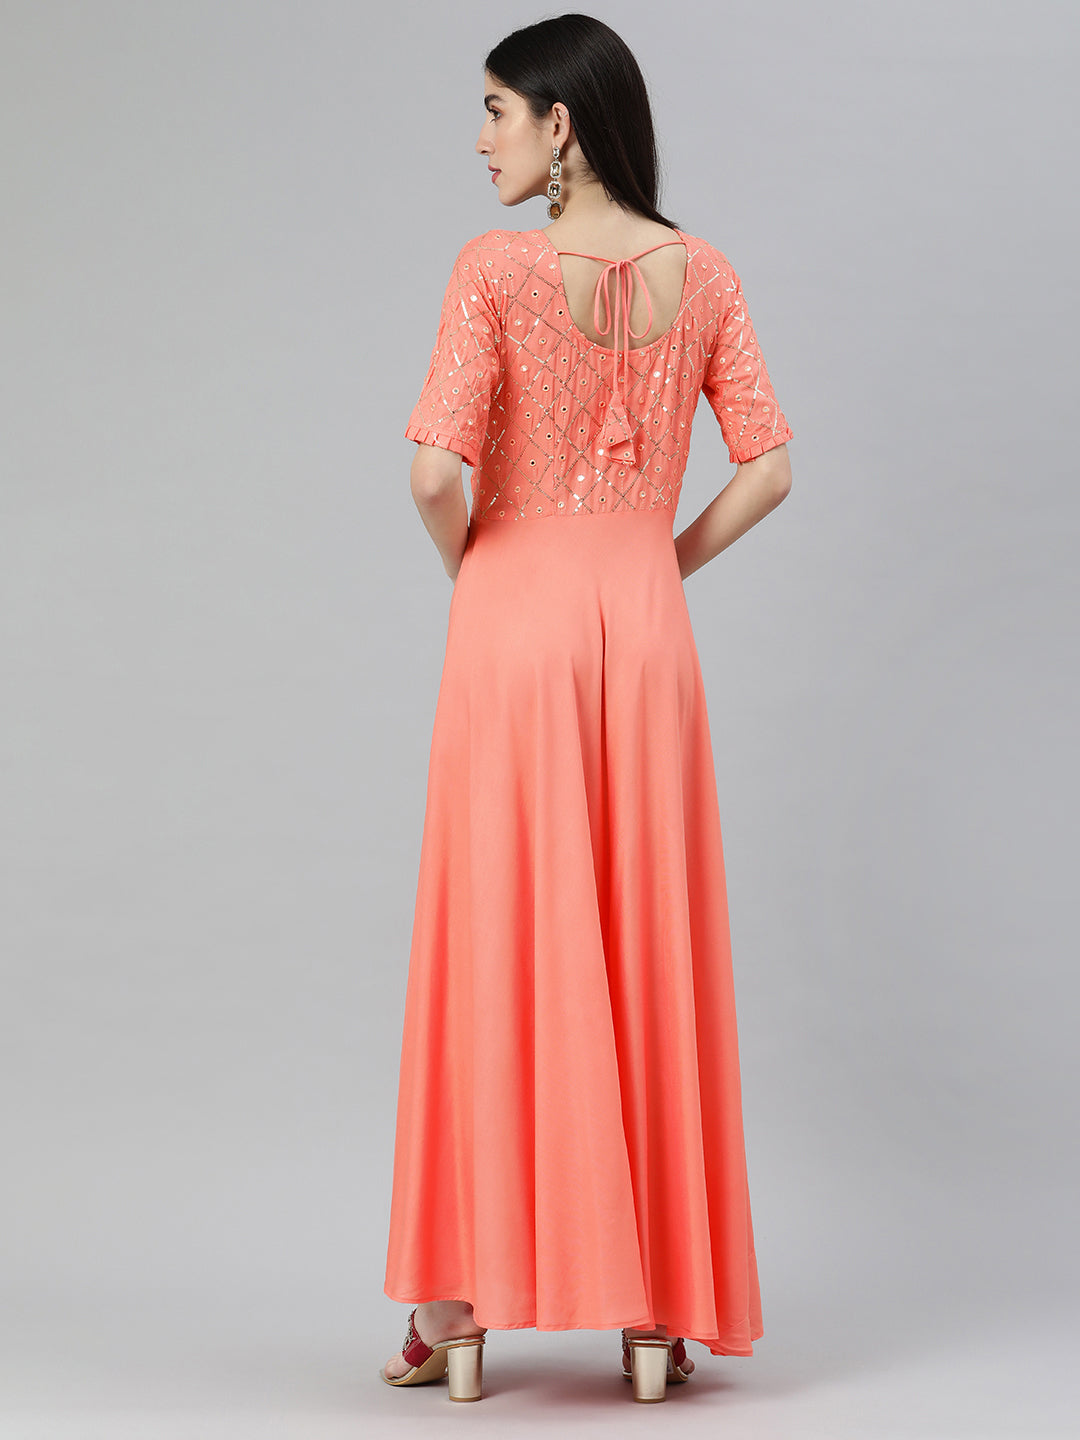 Pastel Peach Flared Gown With Ruffled Hemline and Thread Embroidery –  Chhabra 555